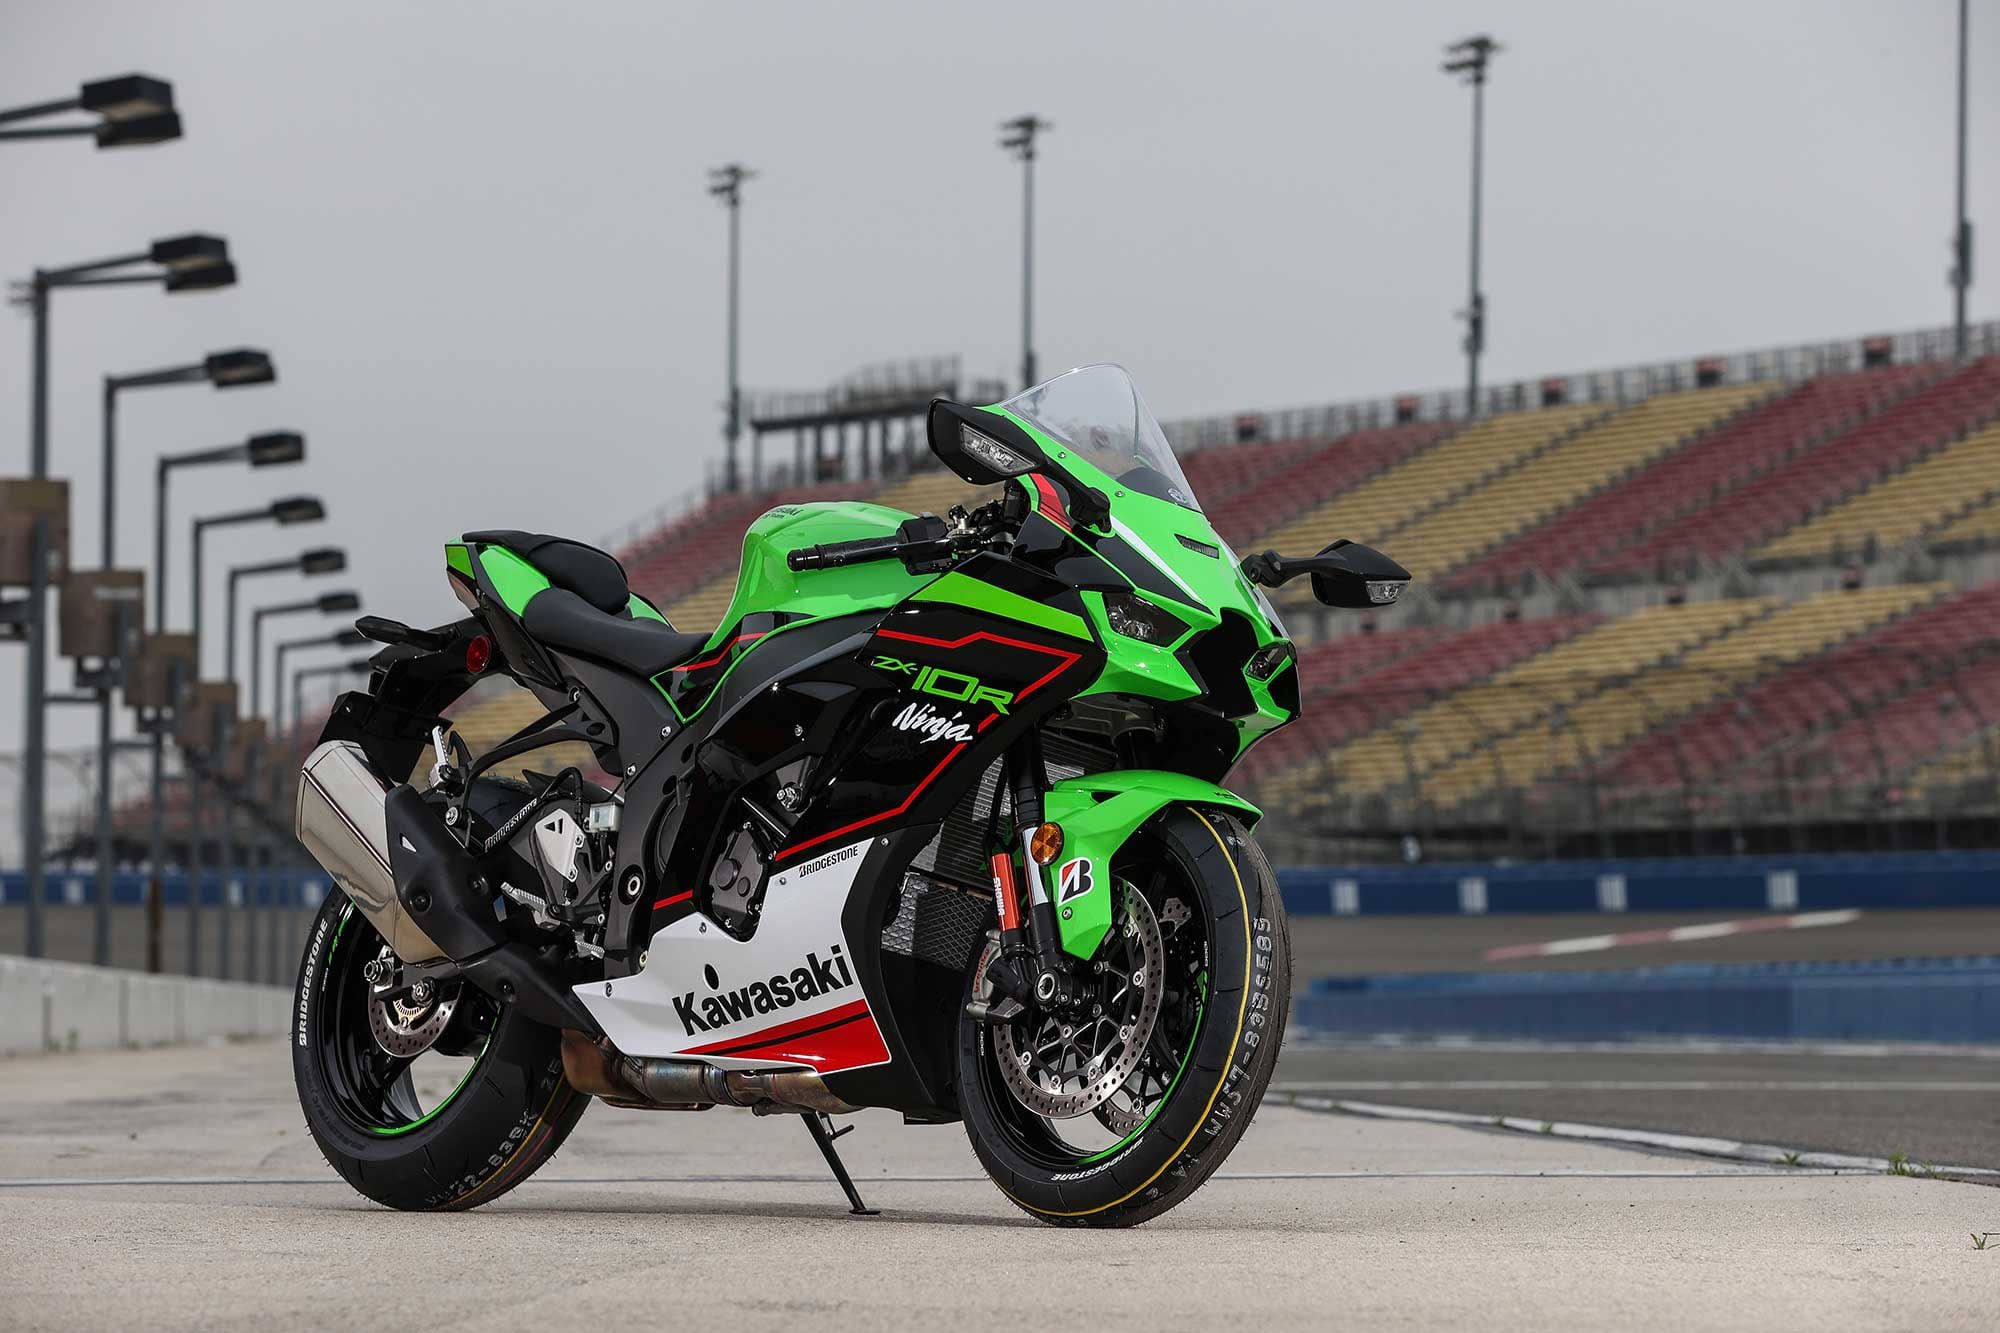 New-generation Ninja styling includes a broader fairing with improved wind protection. Aerodynamic drag is said to be improved by 17 percent while downforce is increased by 7 percent. Win-win.